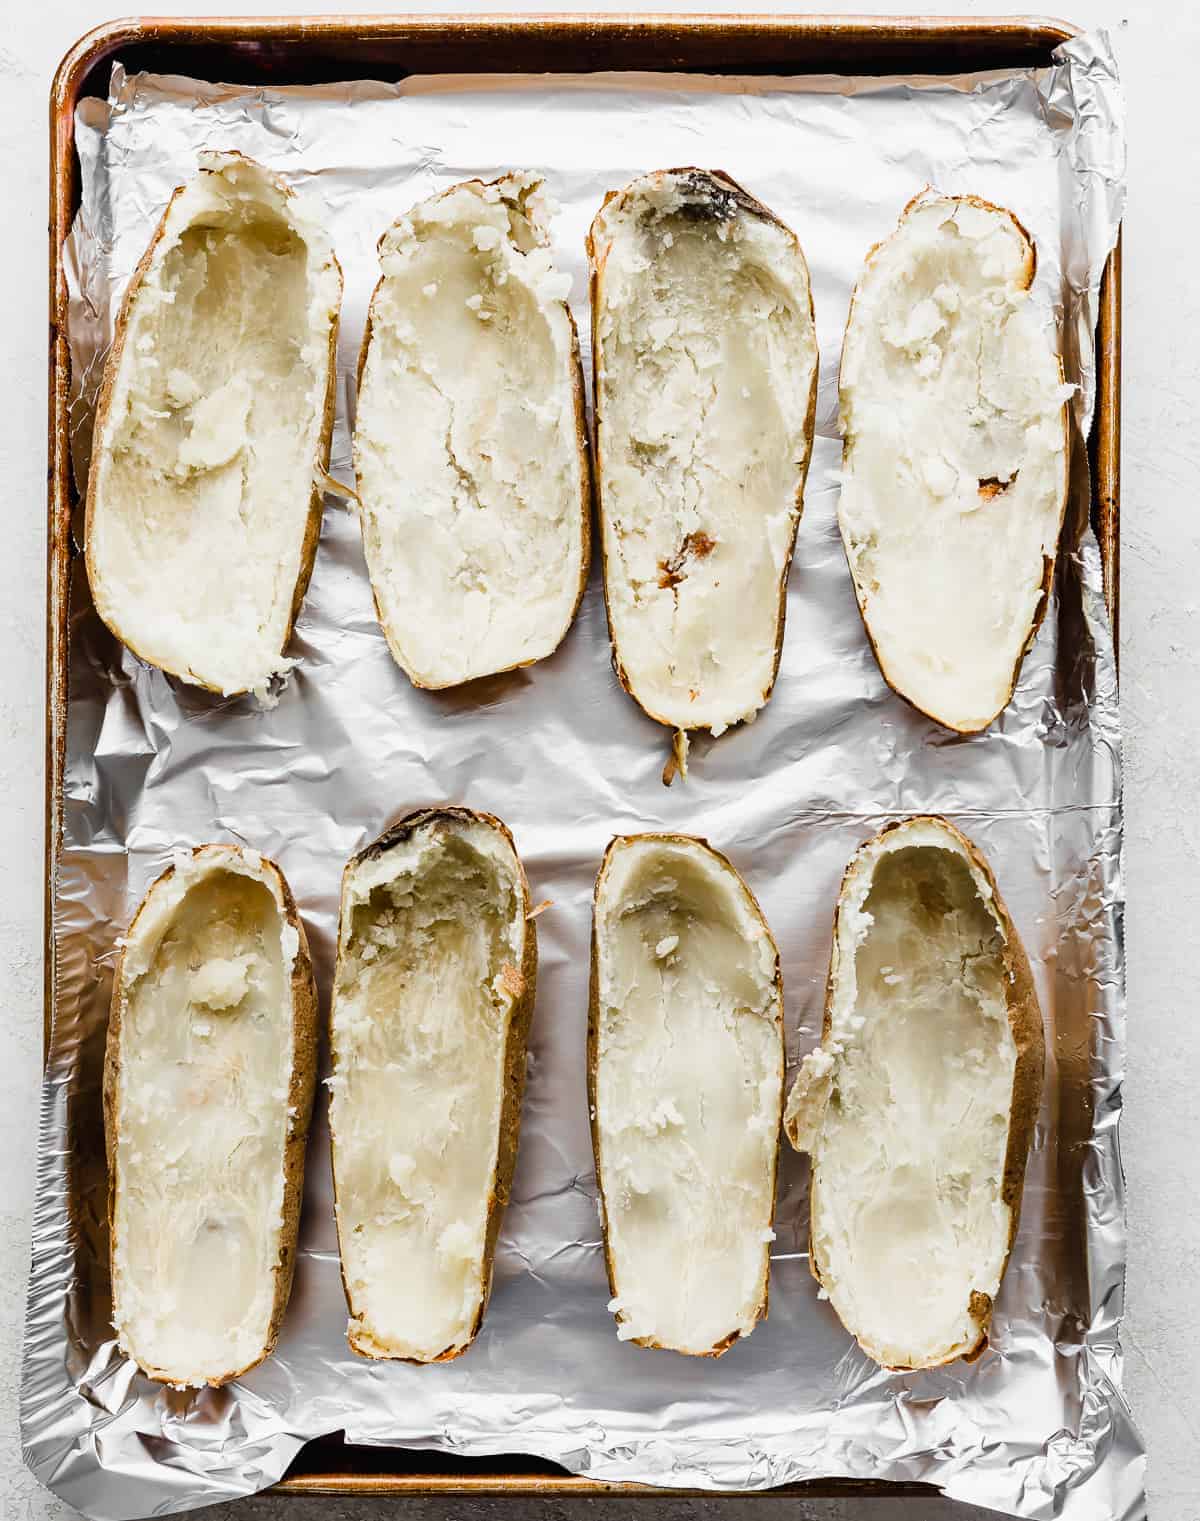 Potato skins on a baking sheet for making Twice Baked Potatoes with Cream Cheese.